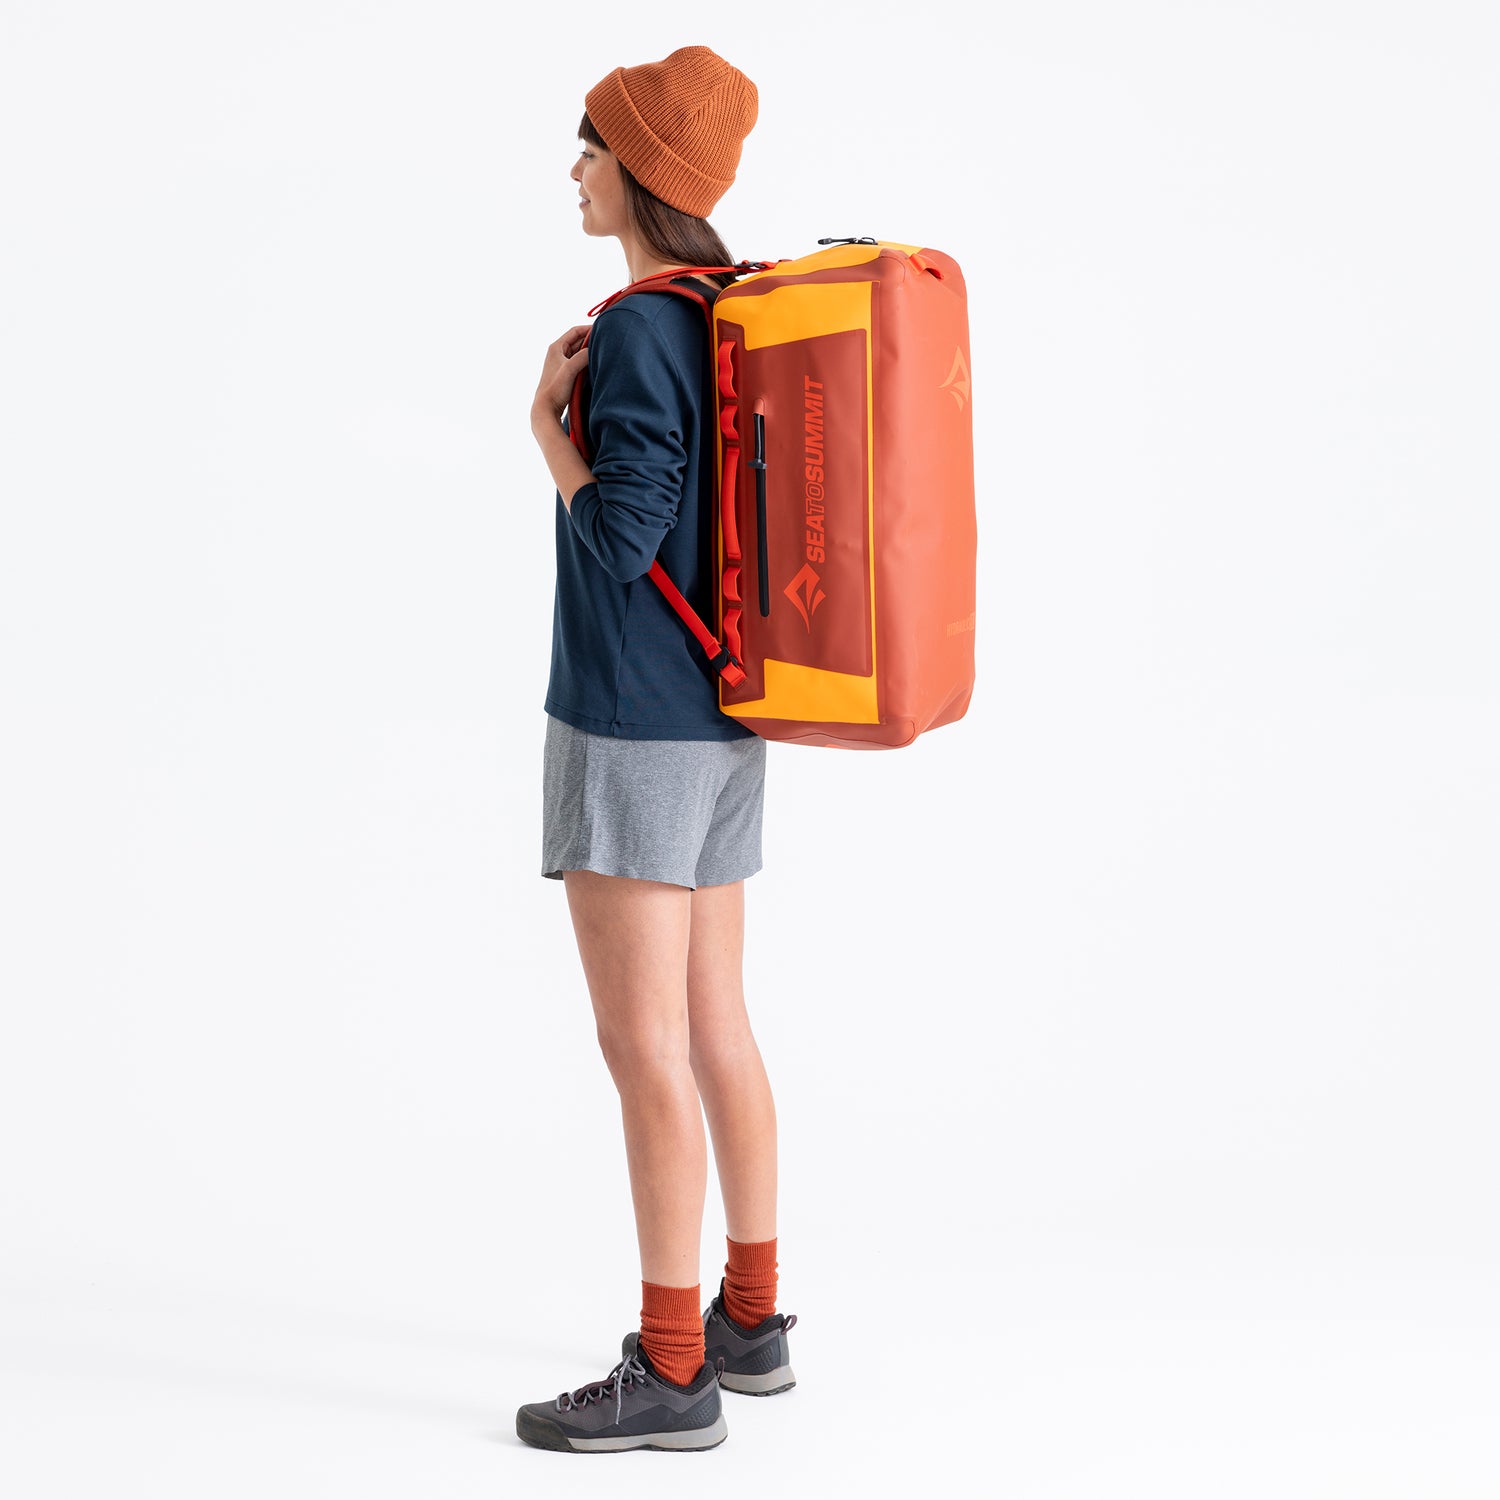 50 litre || Hydraulic Pro Dry Pack